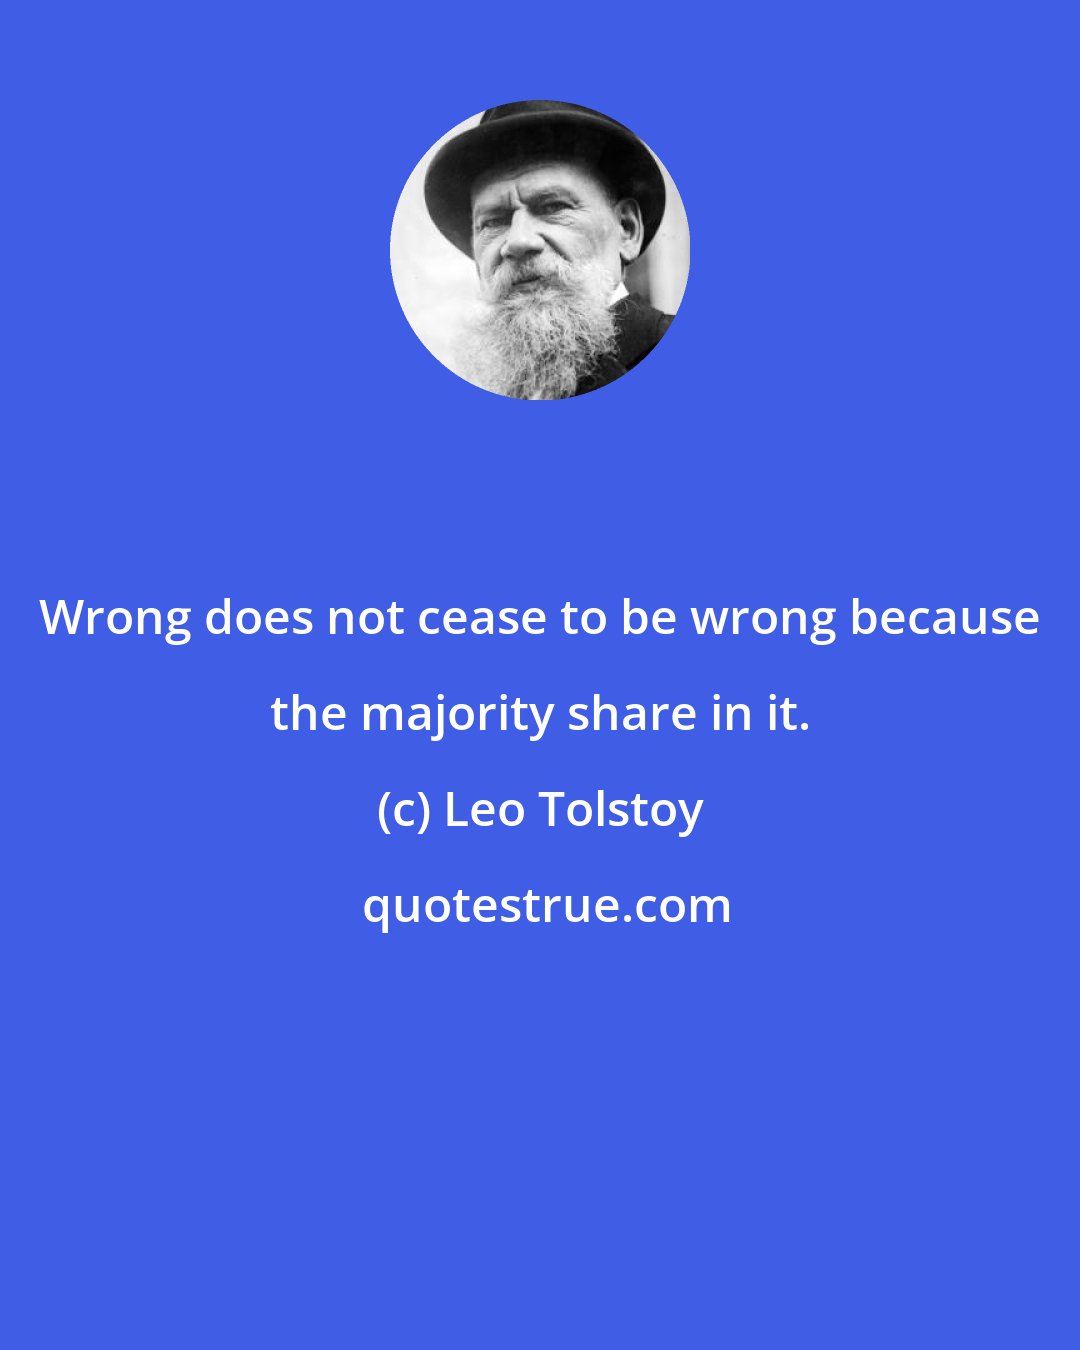 Leo Tolstoy: Wrong does not cease to be wrong because the majority share in it.